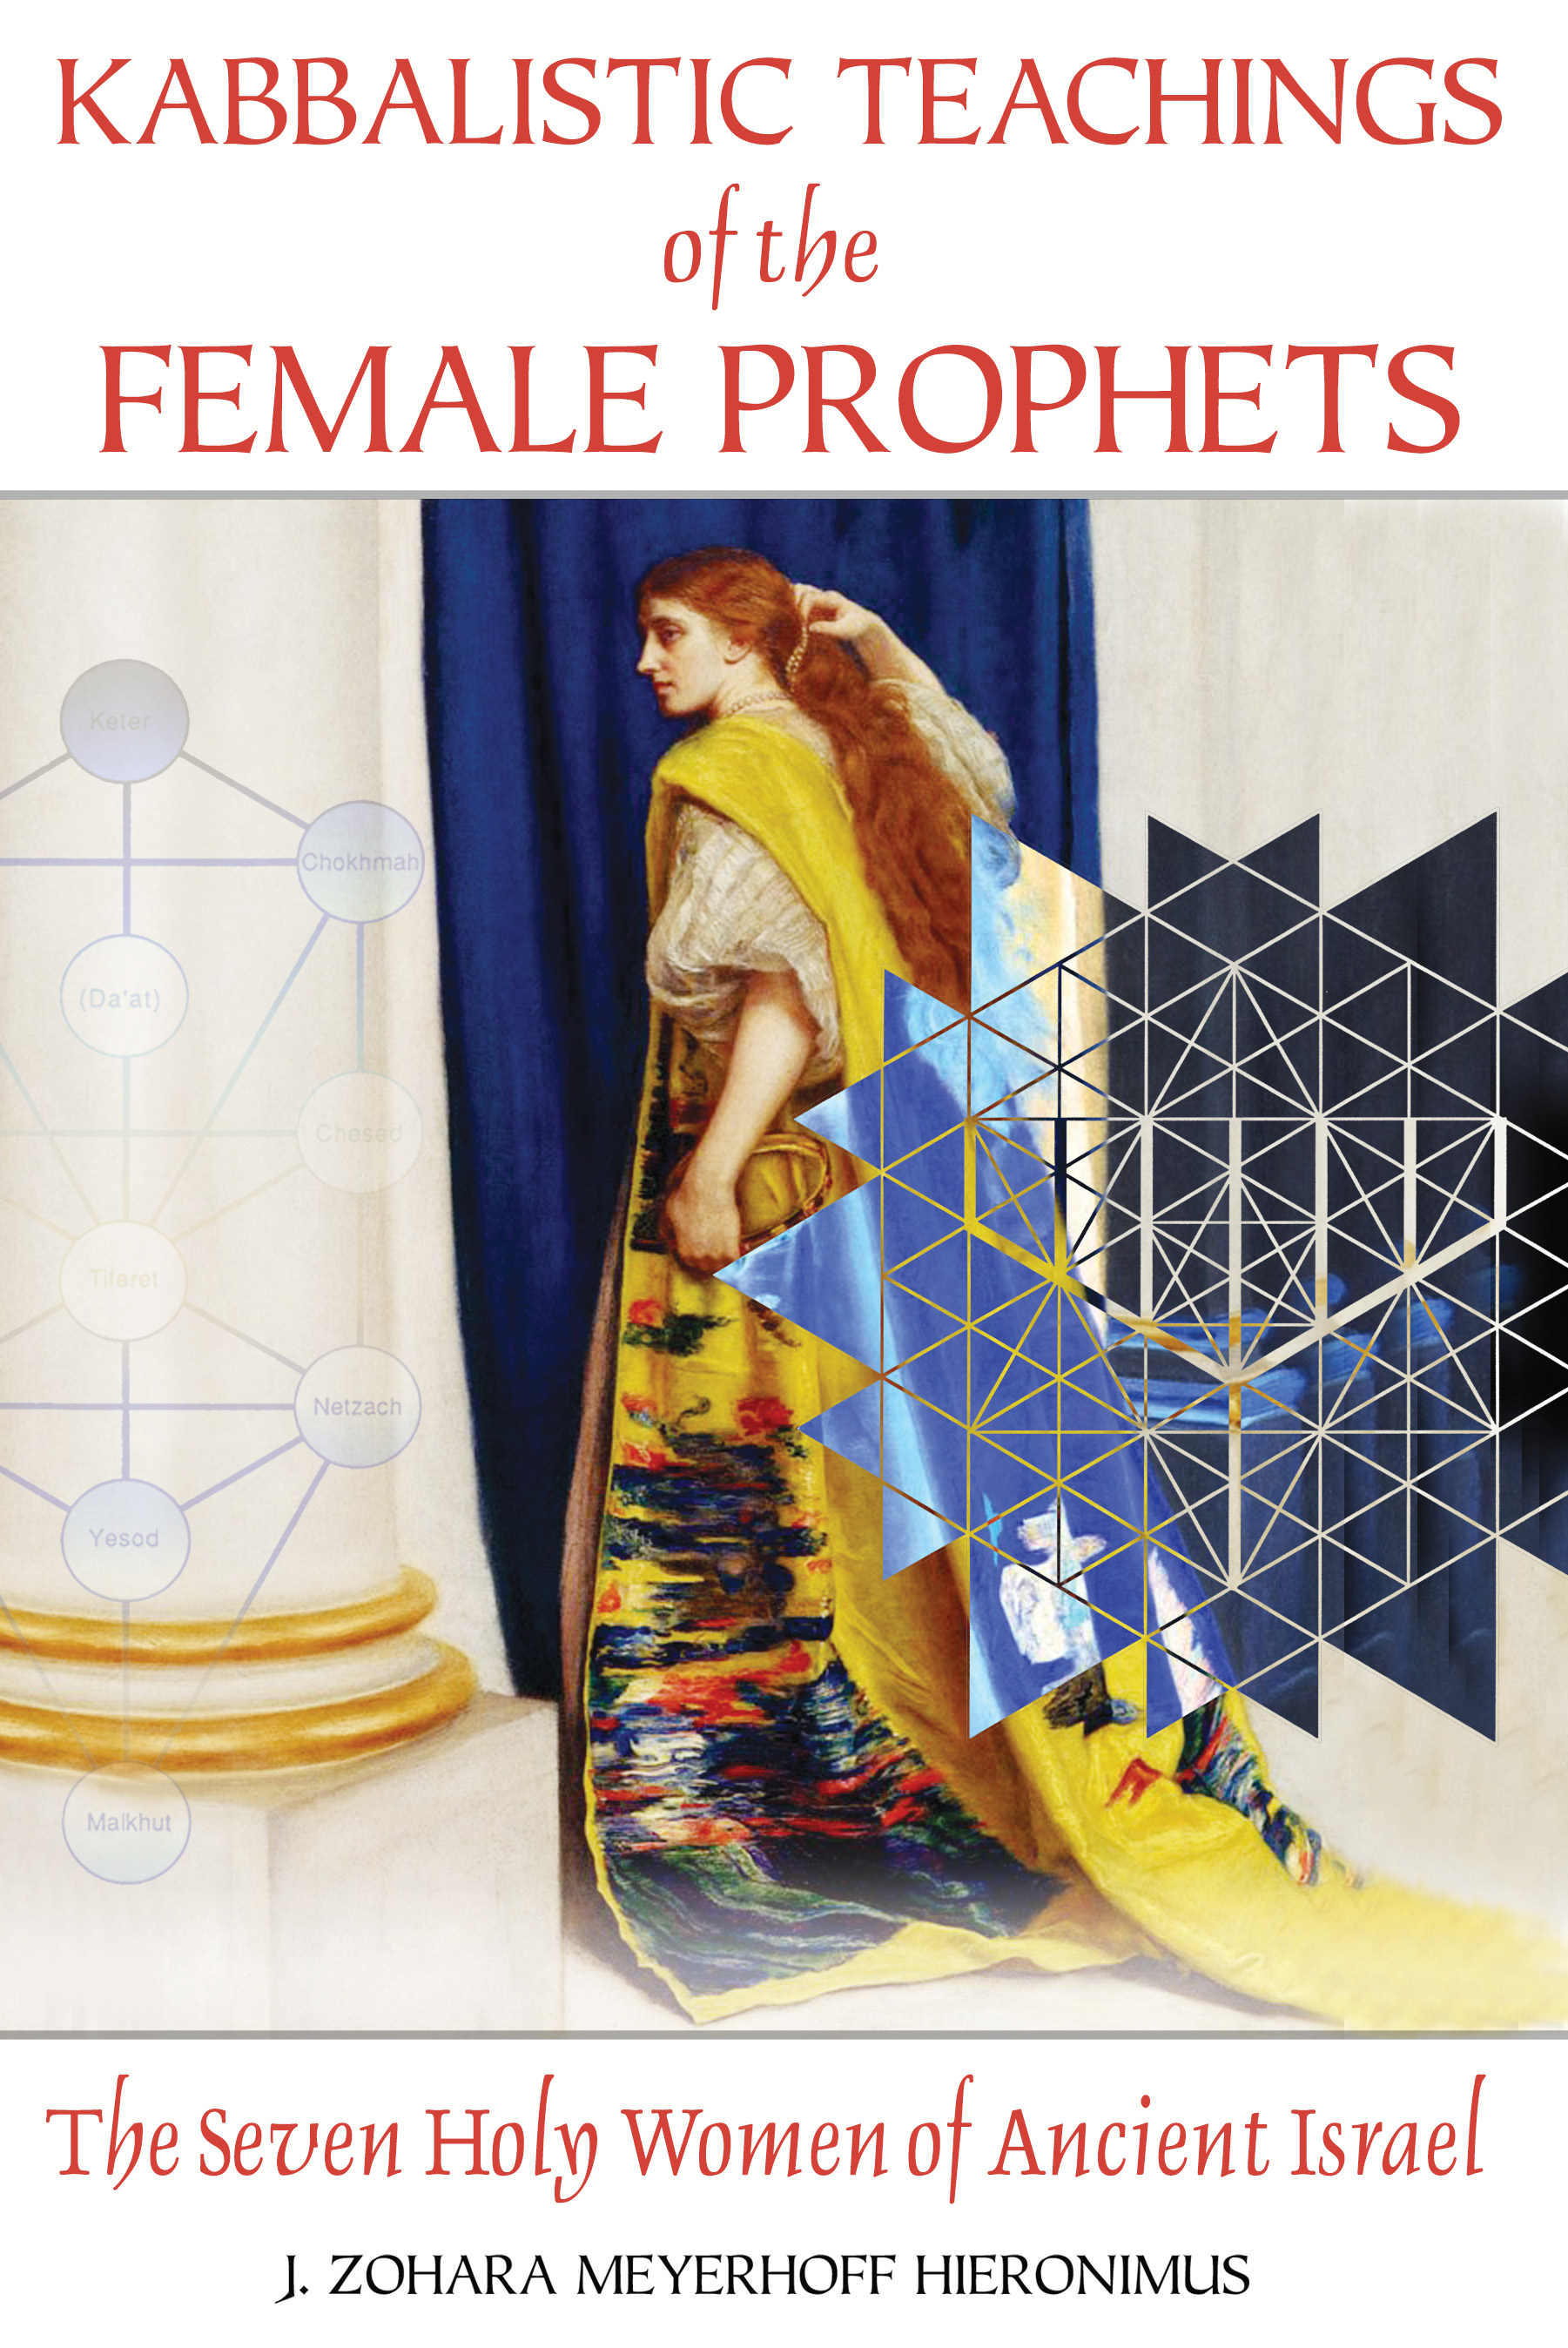 Kabbalistic Teachings of the Female Prophets, The Seven Holy Women of Ancient Israel,